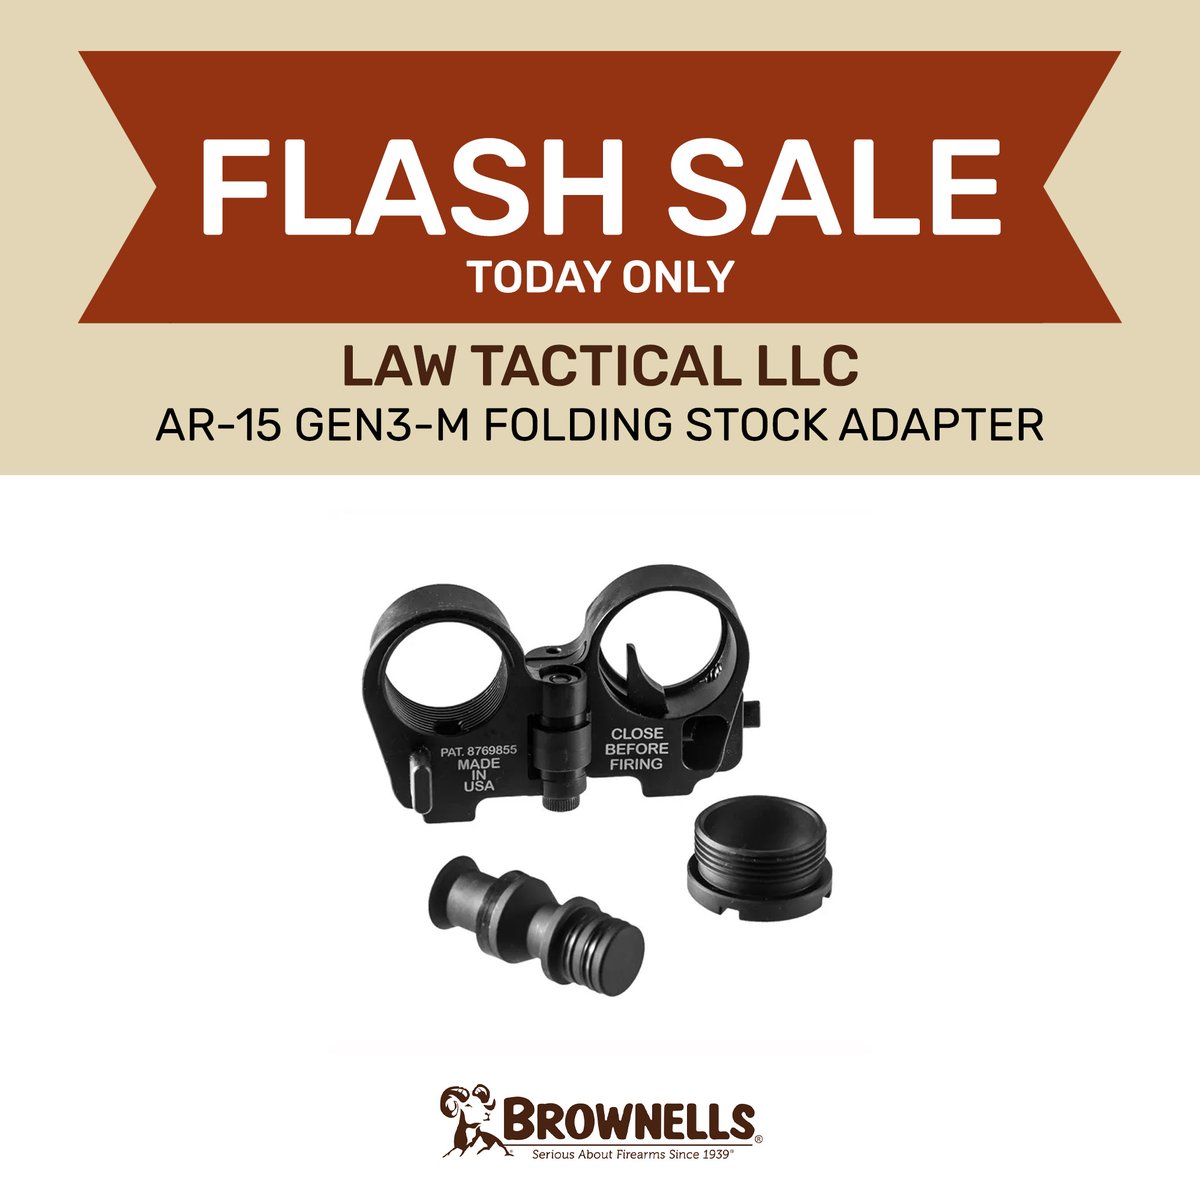 FLASH SALE TODAY ONLY- Law Tactical Gen3-M Folding Stock Adapter. More at brownells.com/gun-parts/rifl…